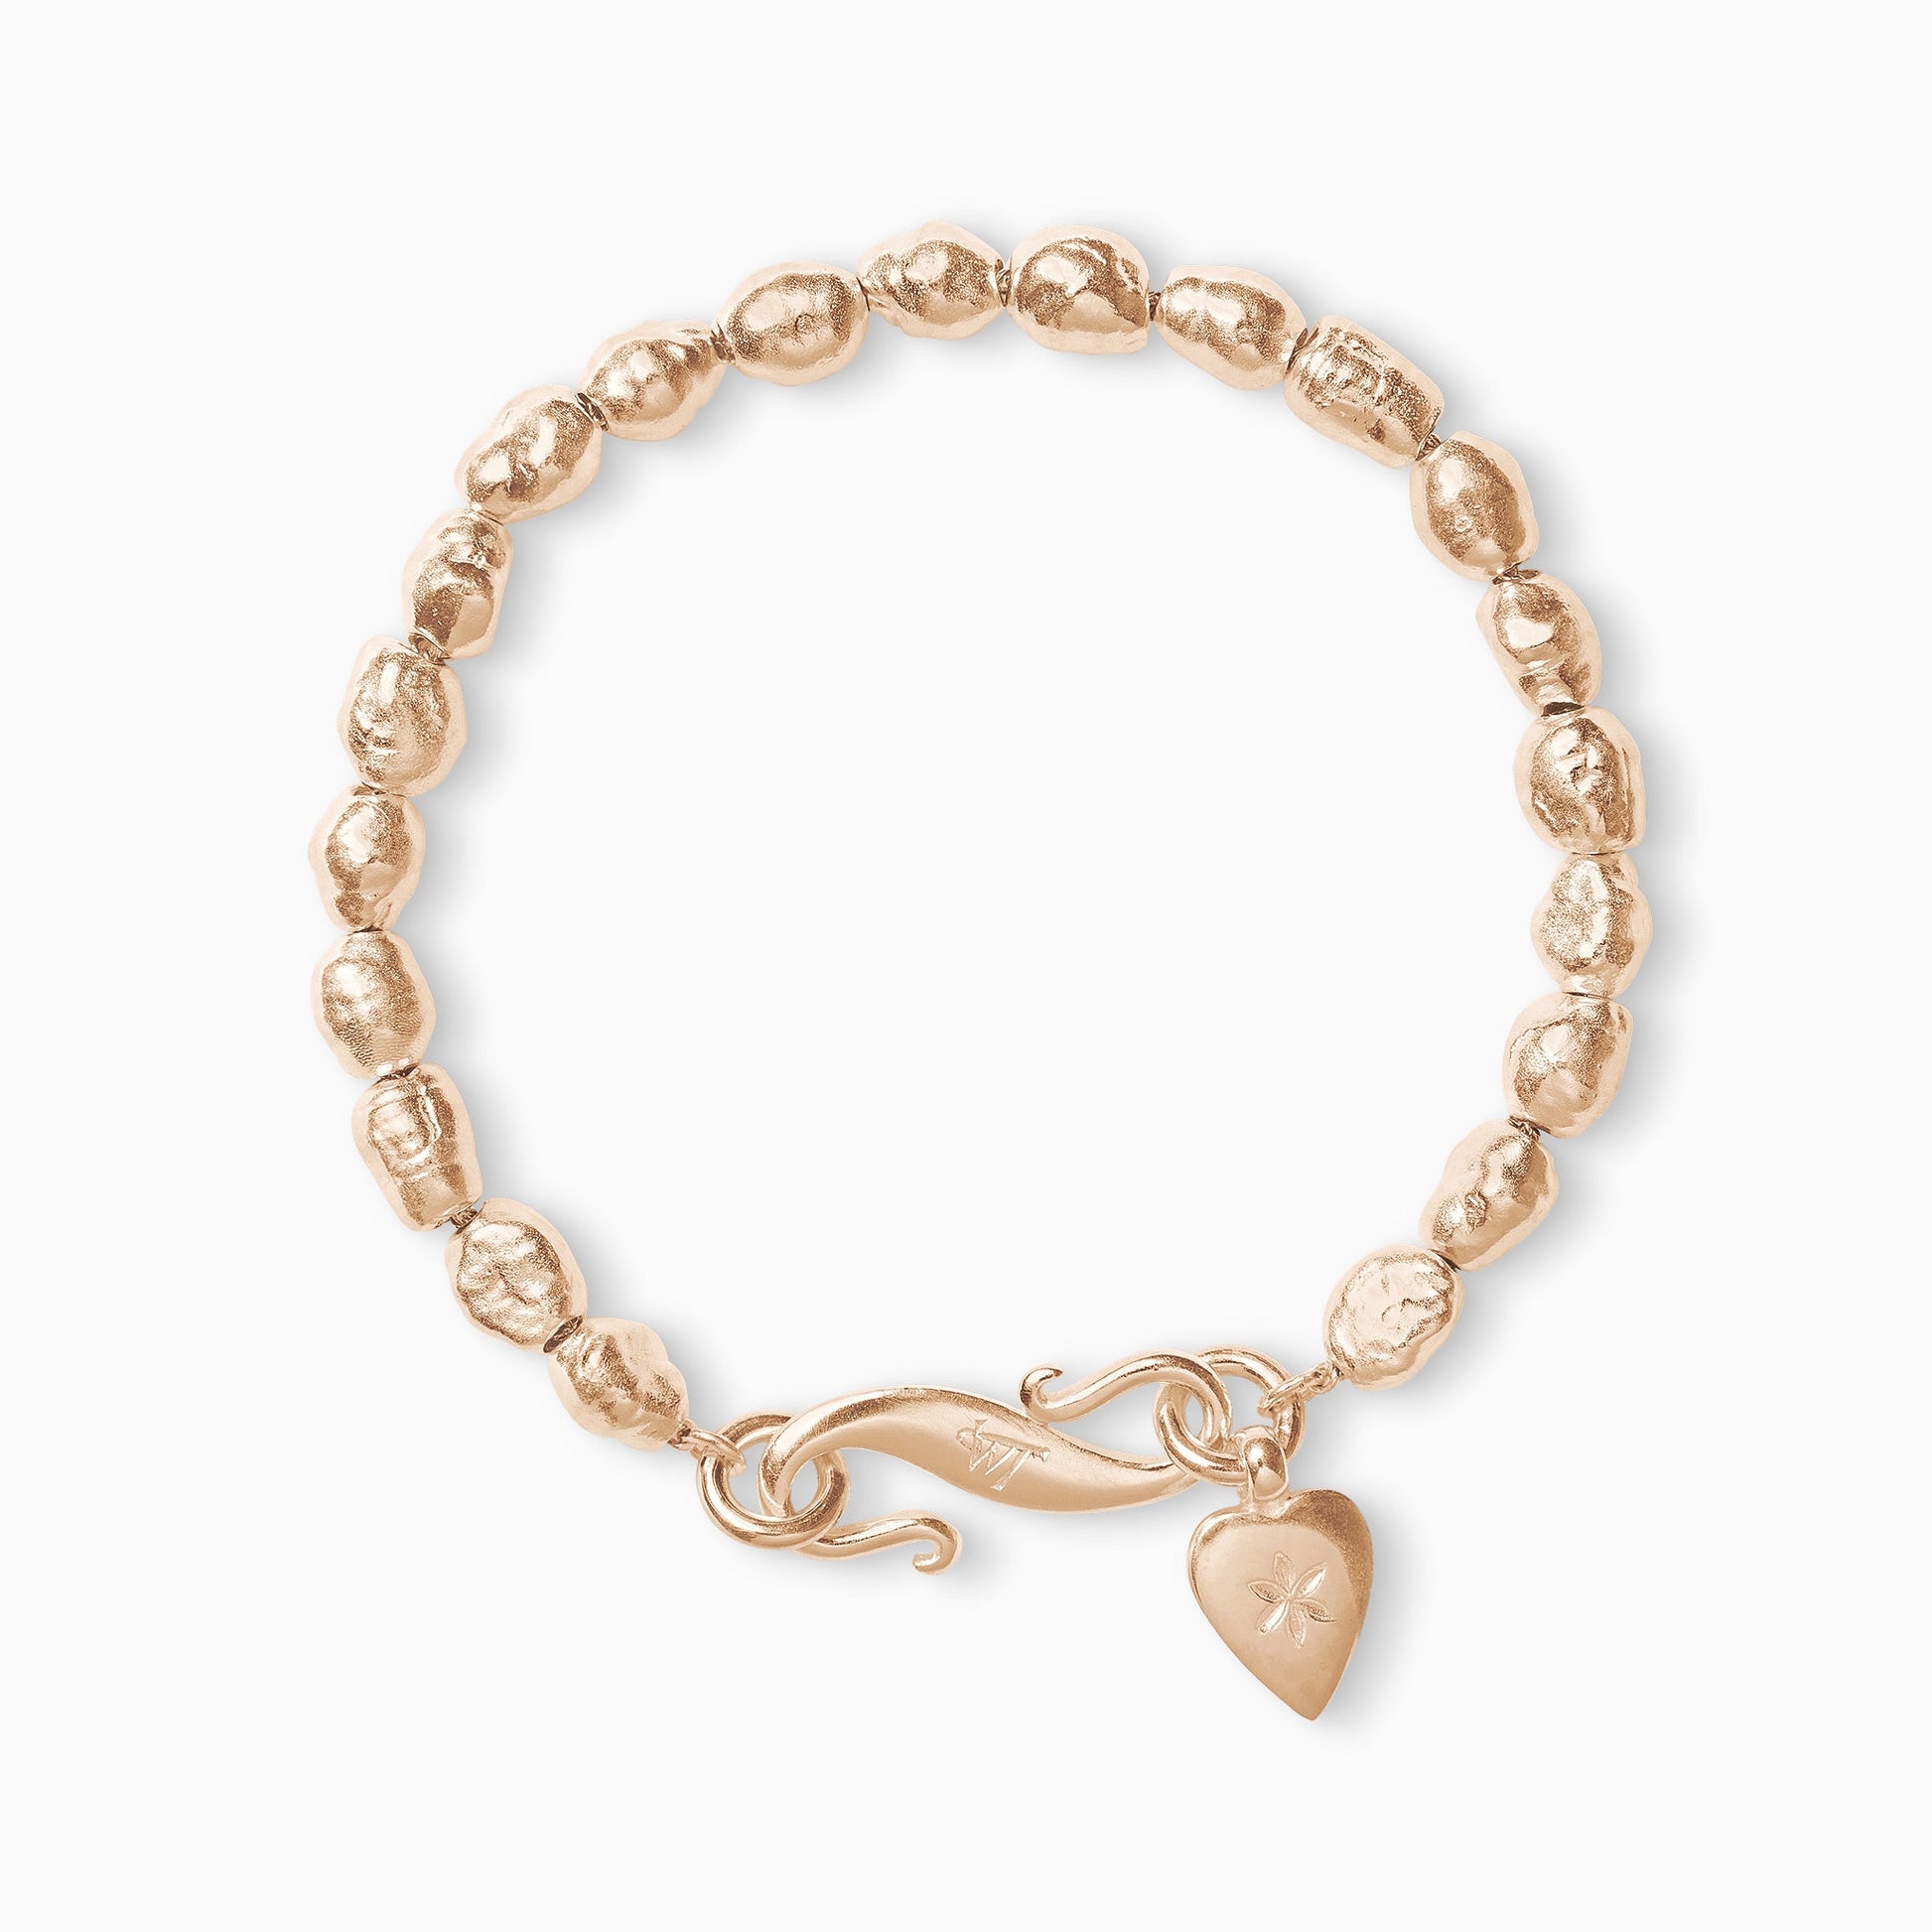 An 18ct Fairtrade rose gold bracelet of handmade irregular pearl shaped textured beads with a smooth heart shaped charm engraved with a 6 petal flower and our signature ’S’ clasp. Bracelet length 210mm. Beads varying approximately 8mm x 6mm.